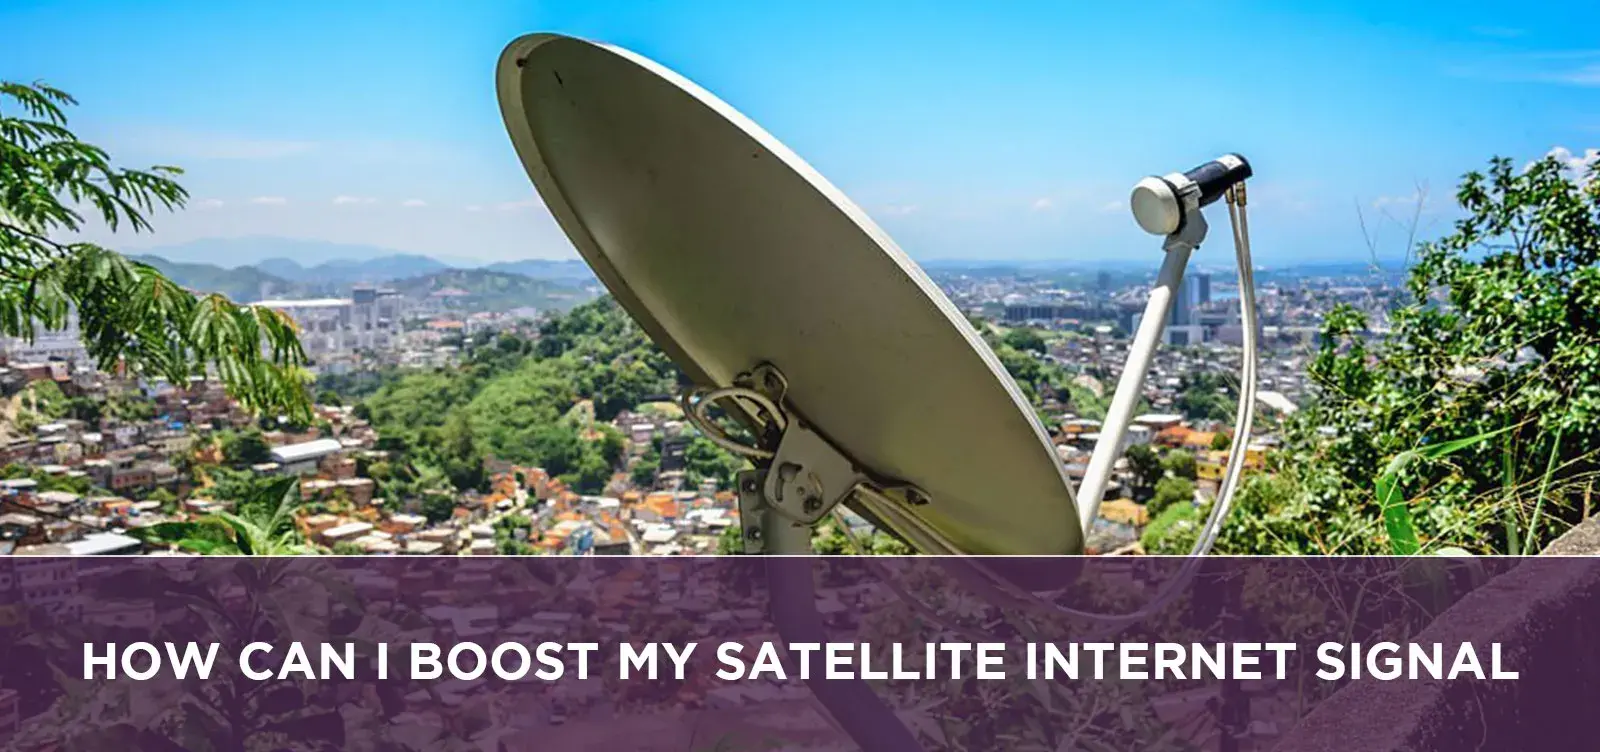 How Can I Boost My Satellite Internet Signal?